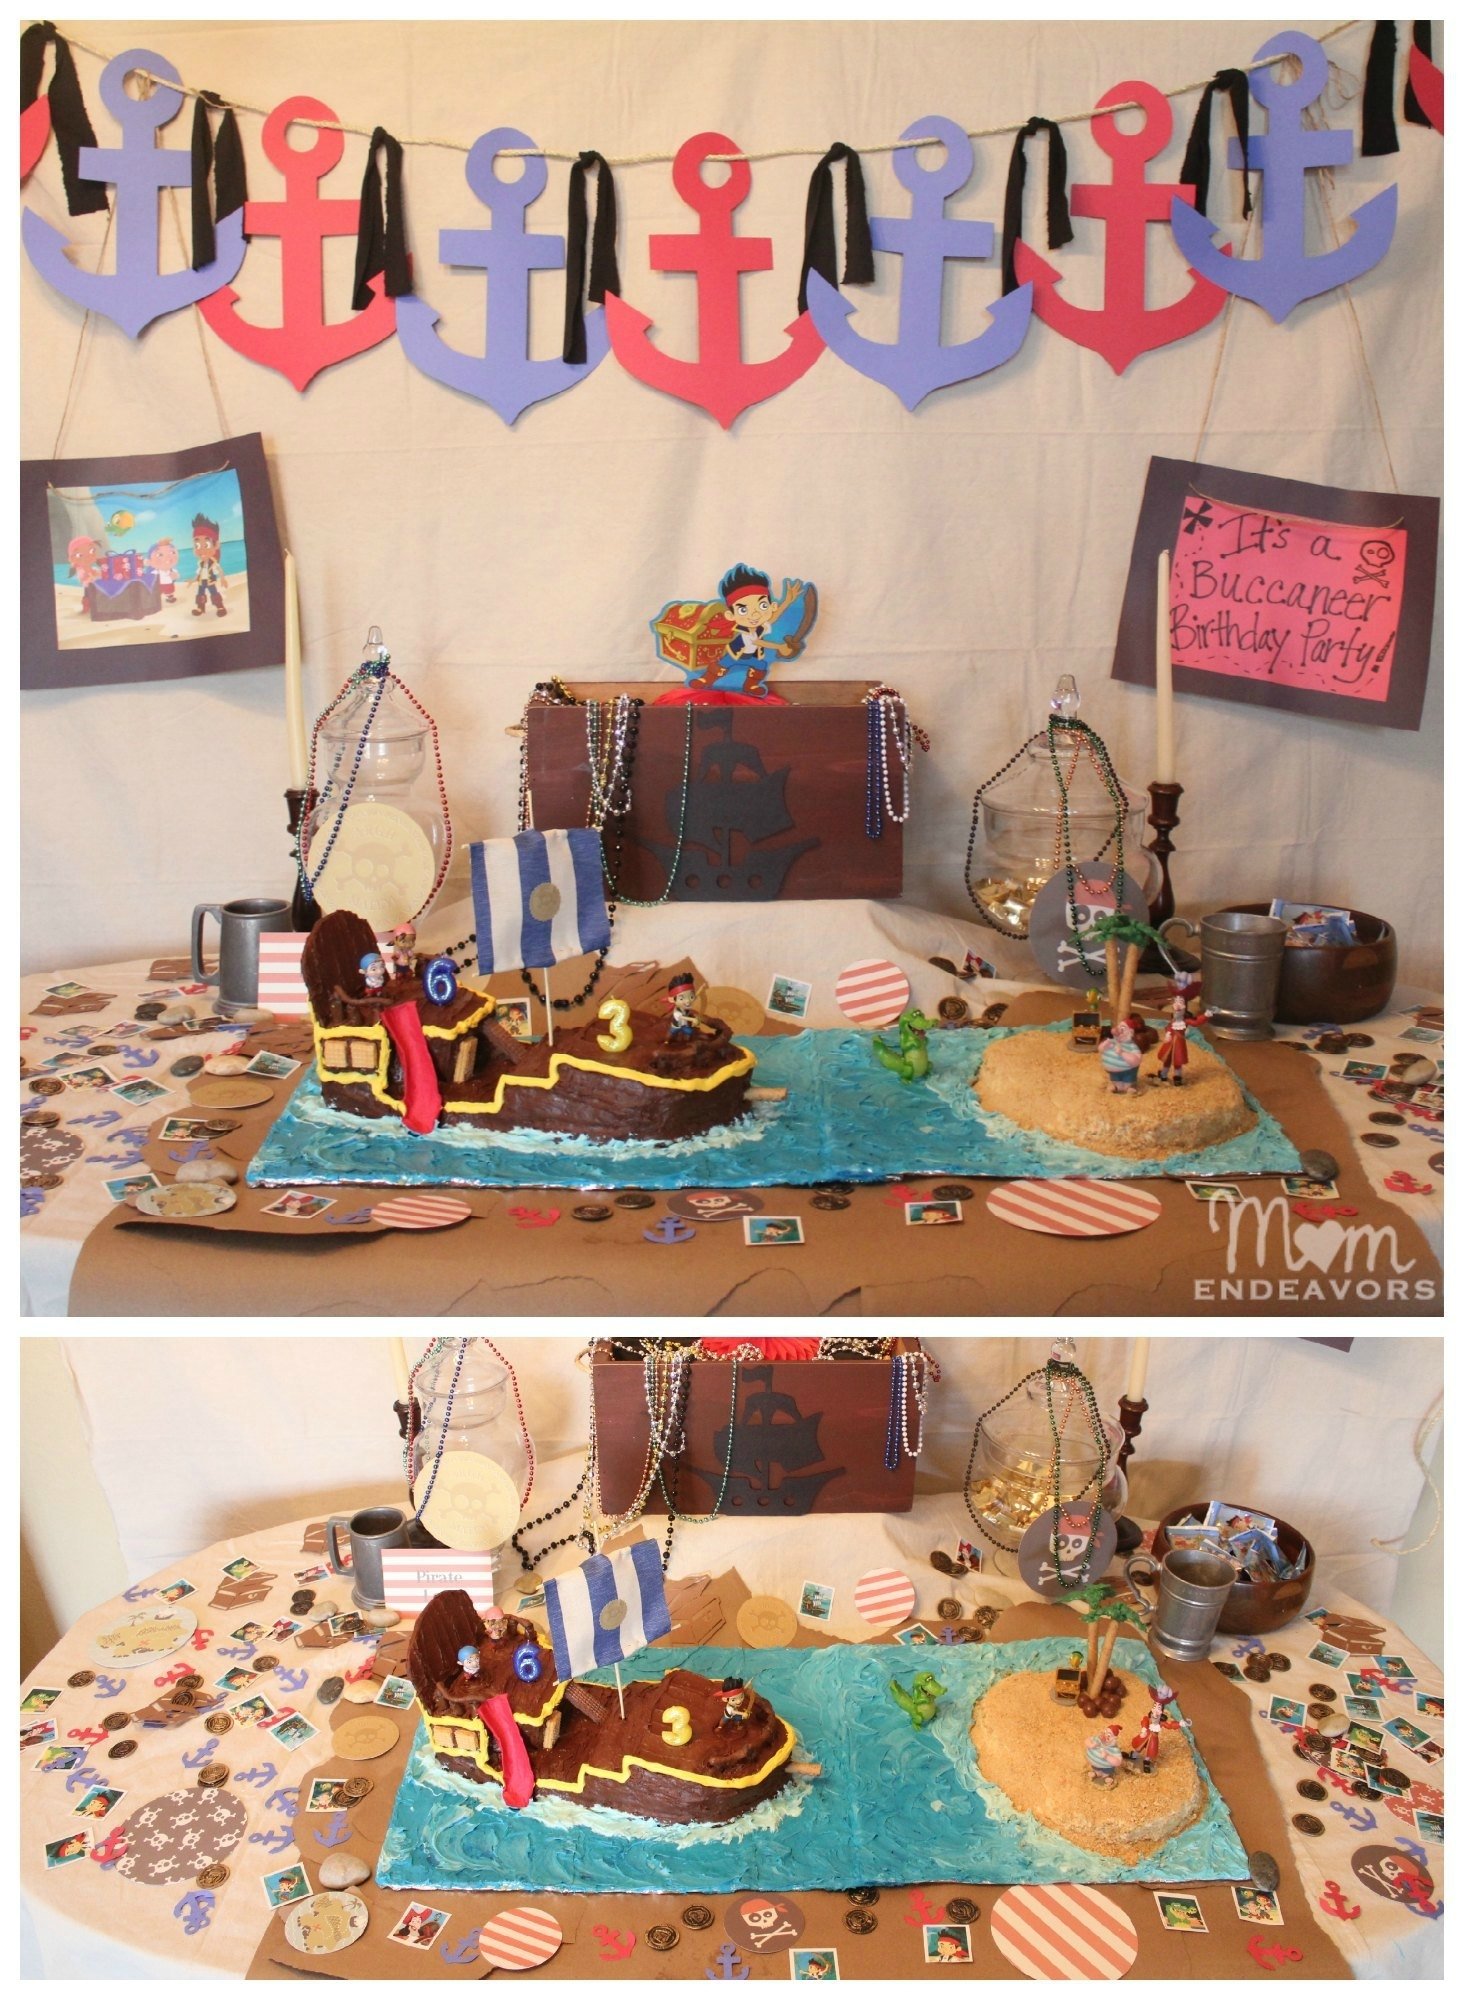 10 Gorgeous Jake And The Neverland Pirates Party Ideas diy bucky pirate ship cake tutorial jake and the never land pirates 2022